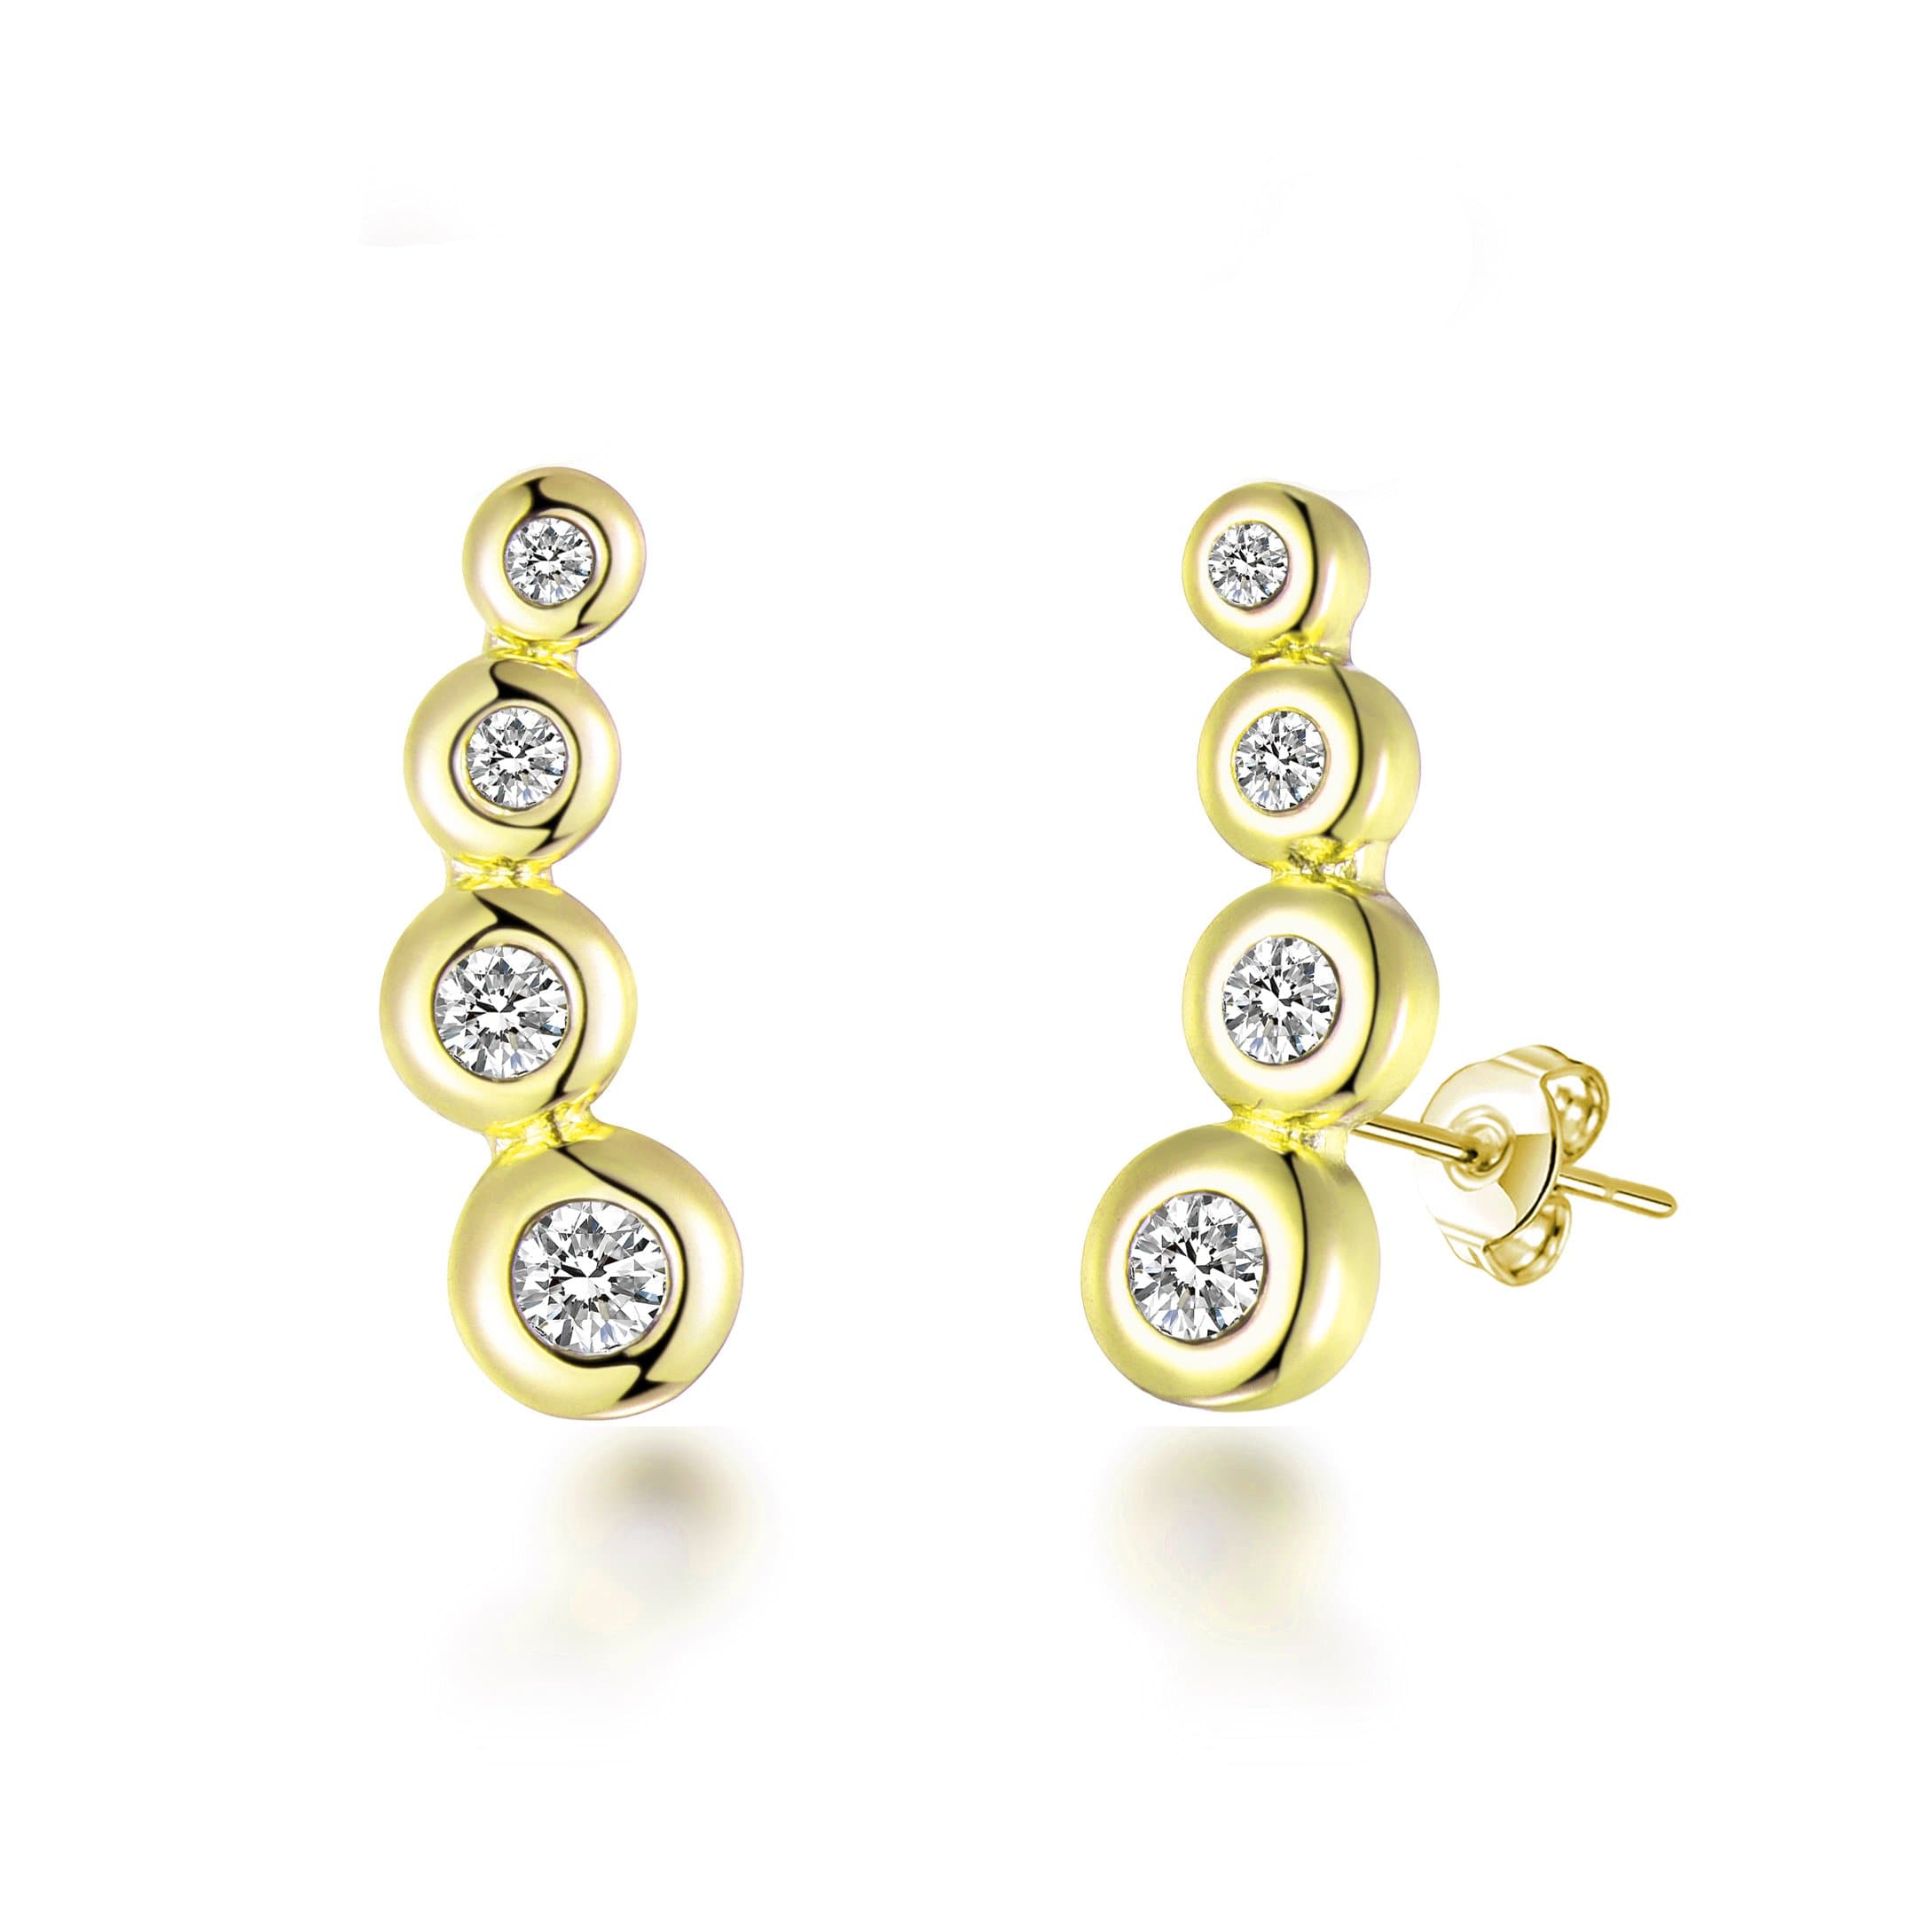 Gold Plated Four Stone Climber Earrings Created With Zircondia® Crystals by Philip Jones Jewellery